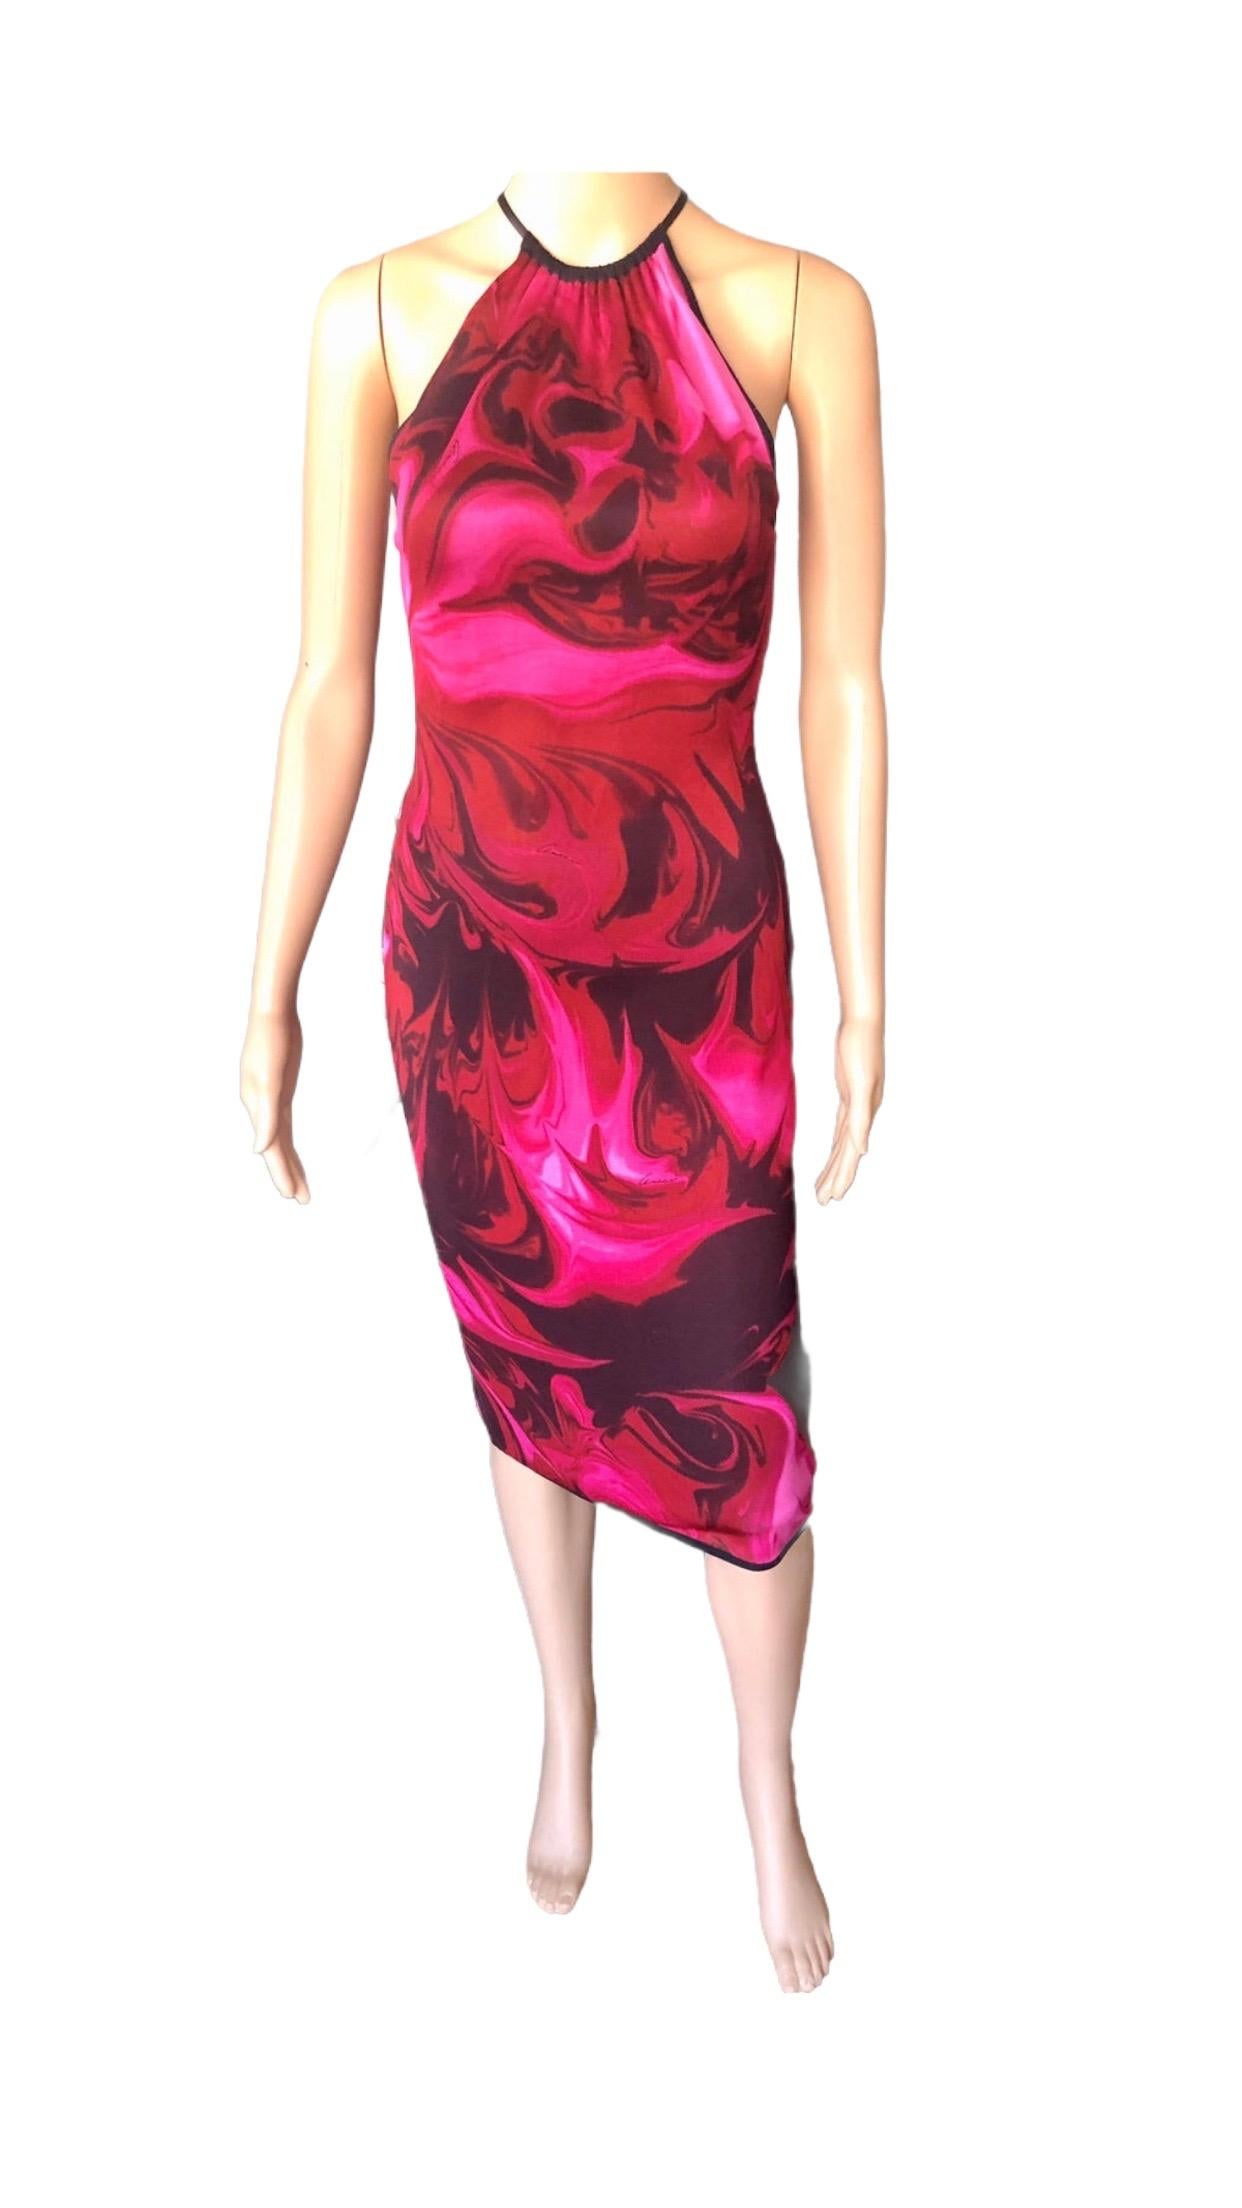 Tom Ford for Gucci S/S 2001 Bodycon Knit Printed Midi Dress 5